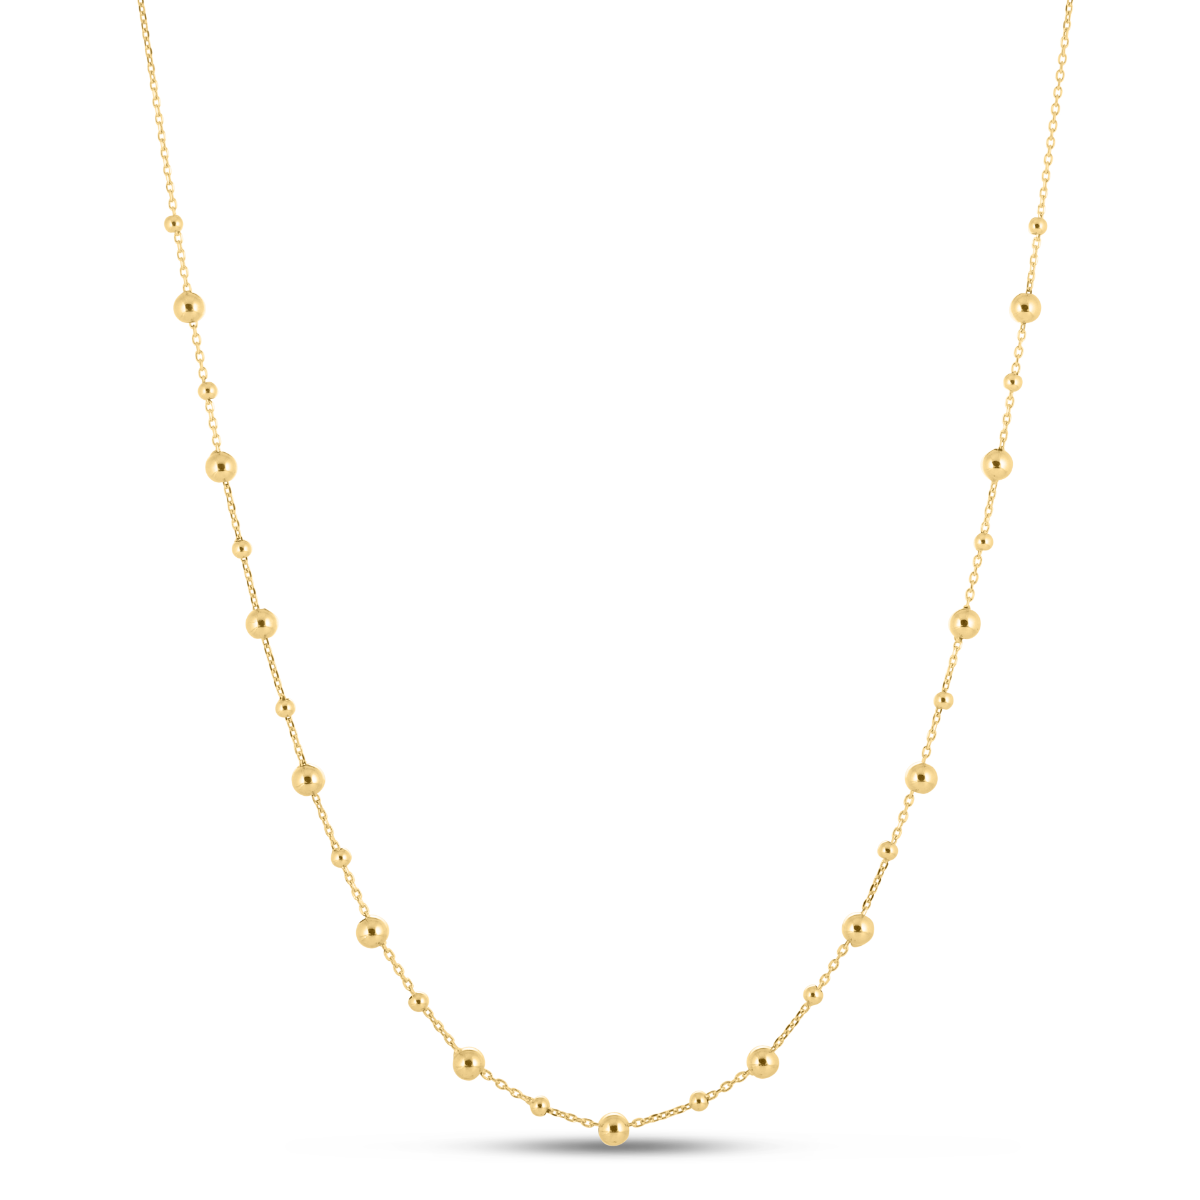 Beaded Ball Chain Necklaces in 14k Gold